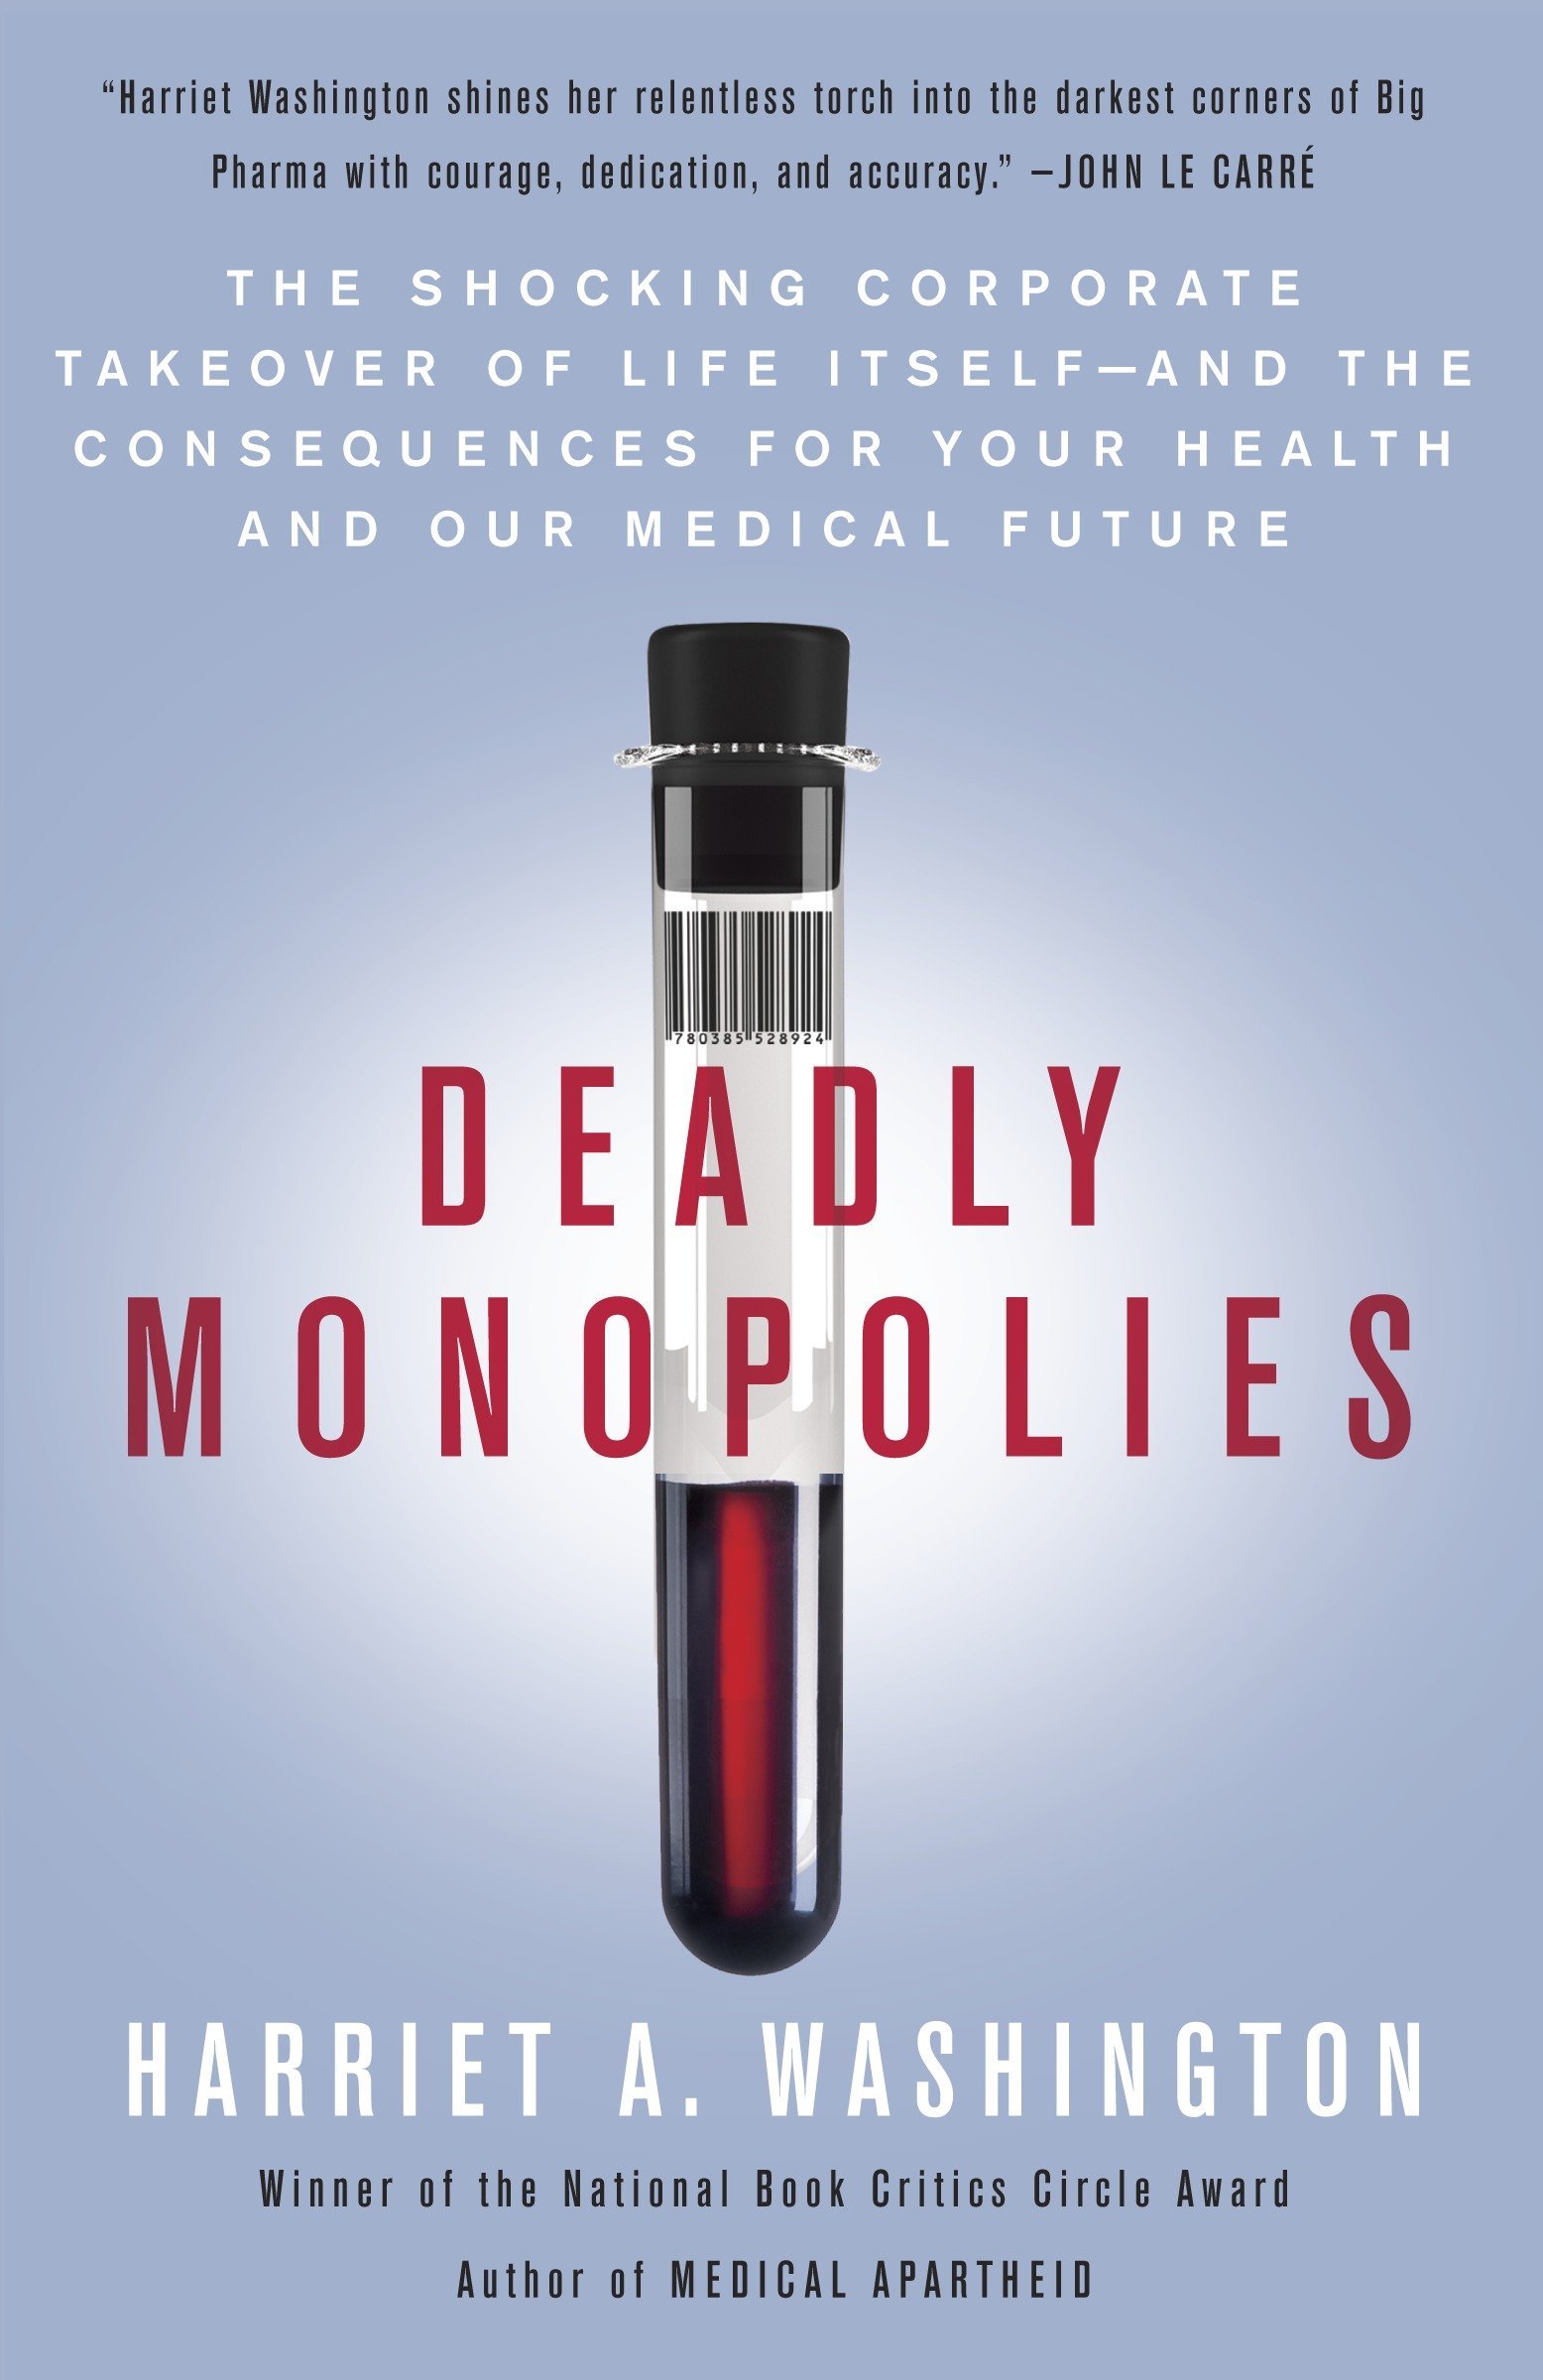 Deadly Monopolies: The Shocking Corporate Takeover of Life Itself, and the Consequences for Your Health and Our Medical Future